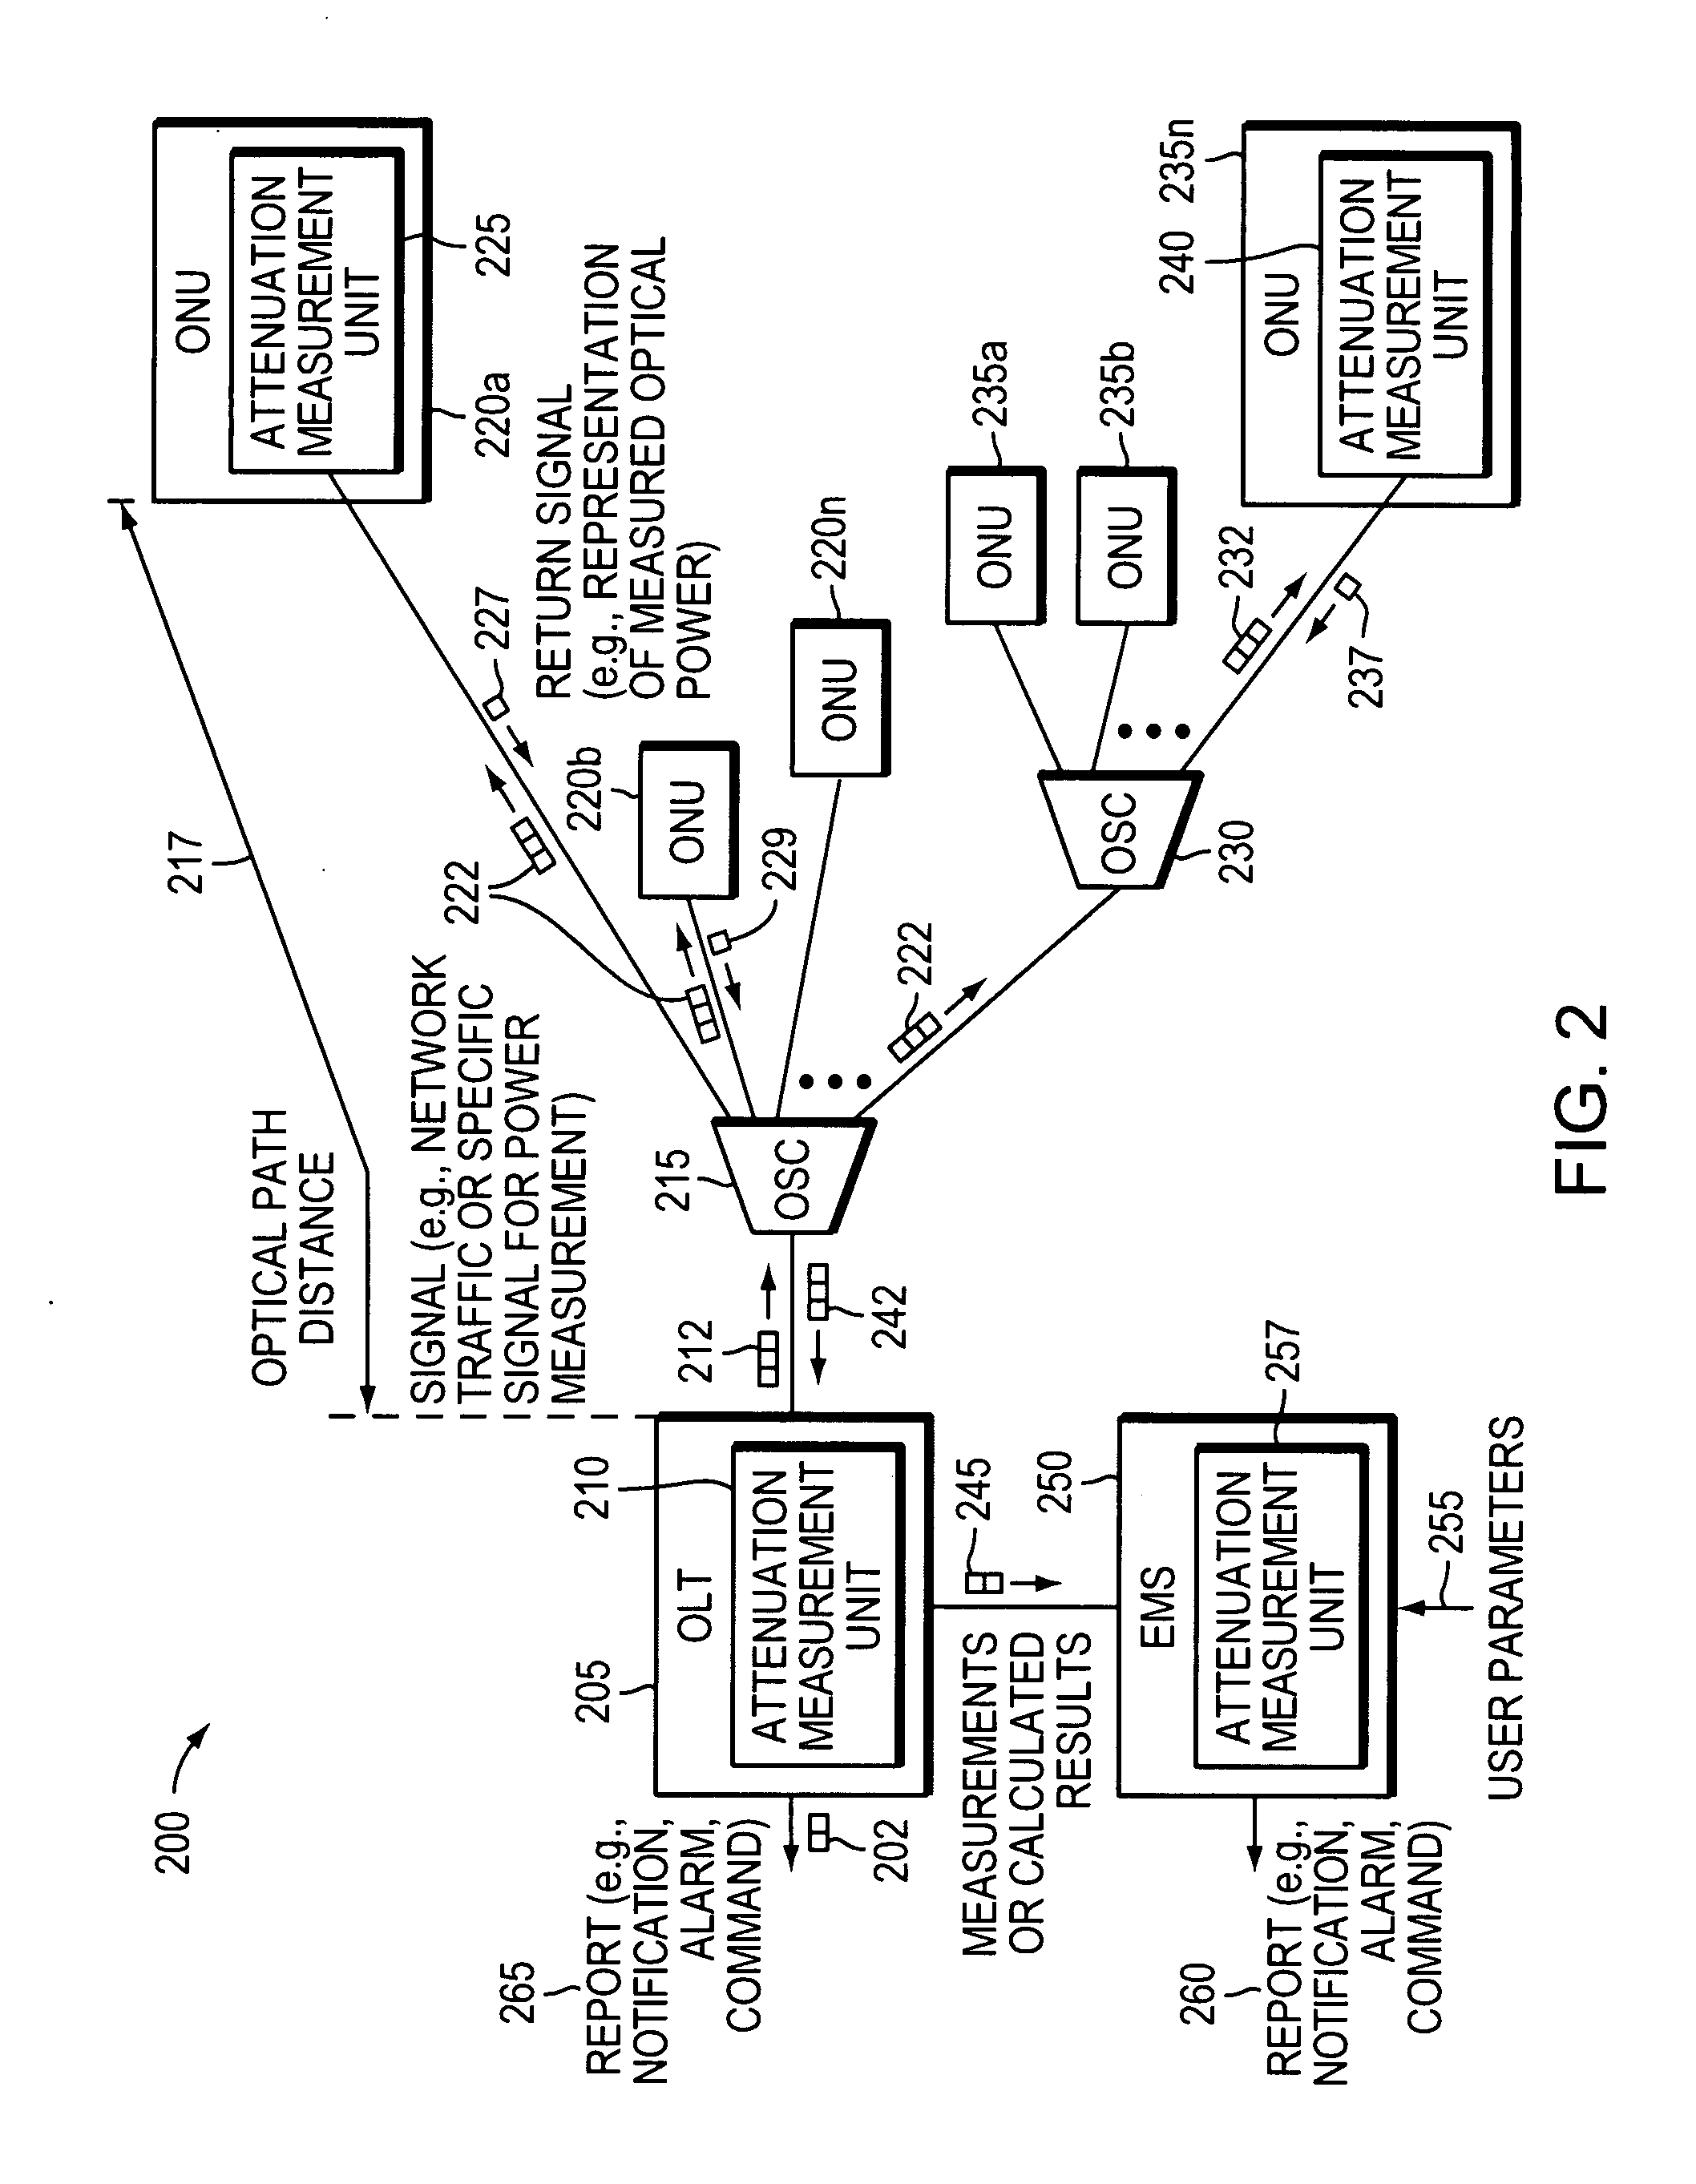 Method and apparatus for determining optical path attenuation between passive optical network nodes